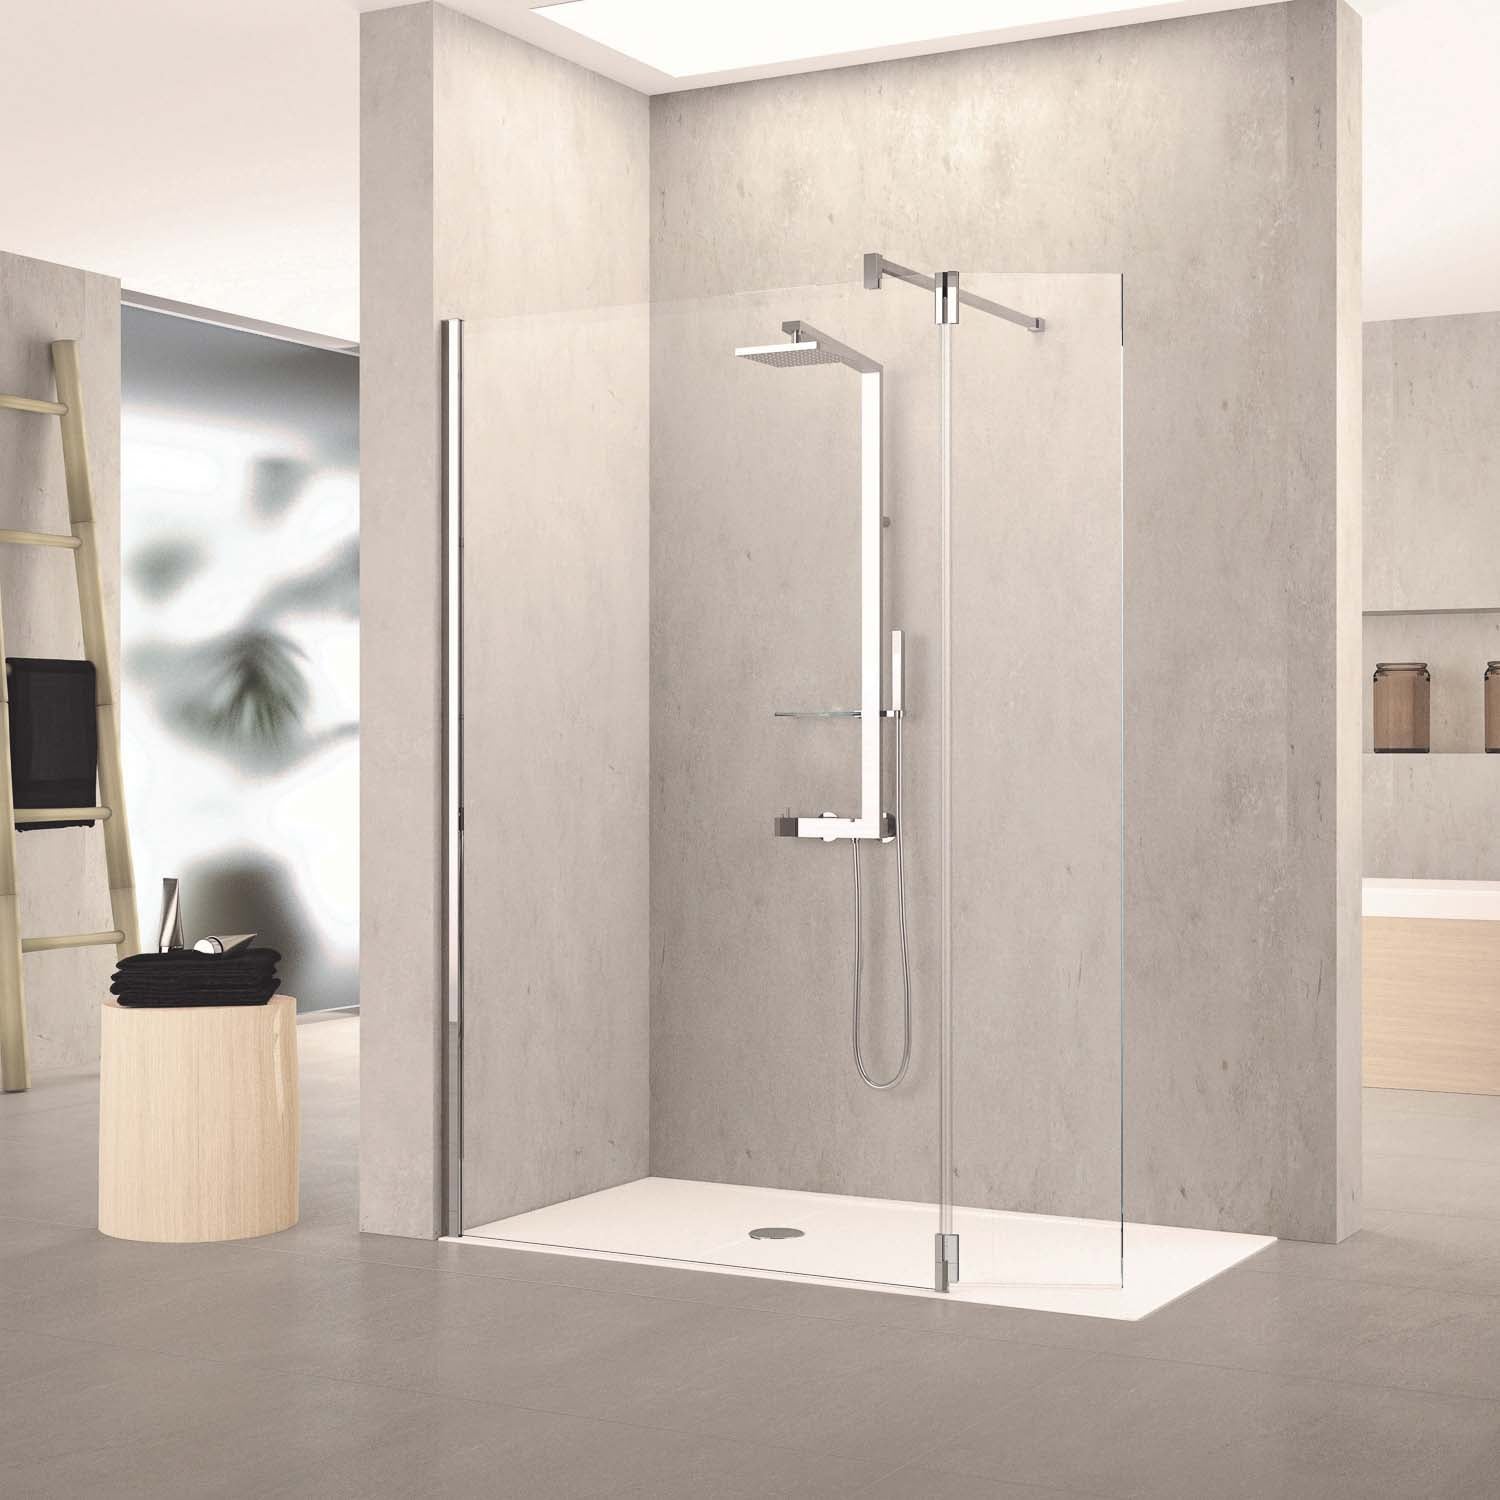 370mm Ergo Wet Room Deflector Panel Clear Glass with a chrome finish lifestyle image